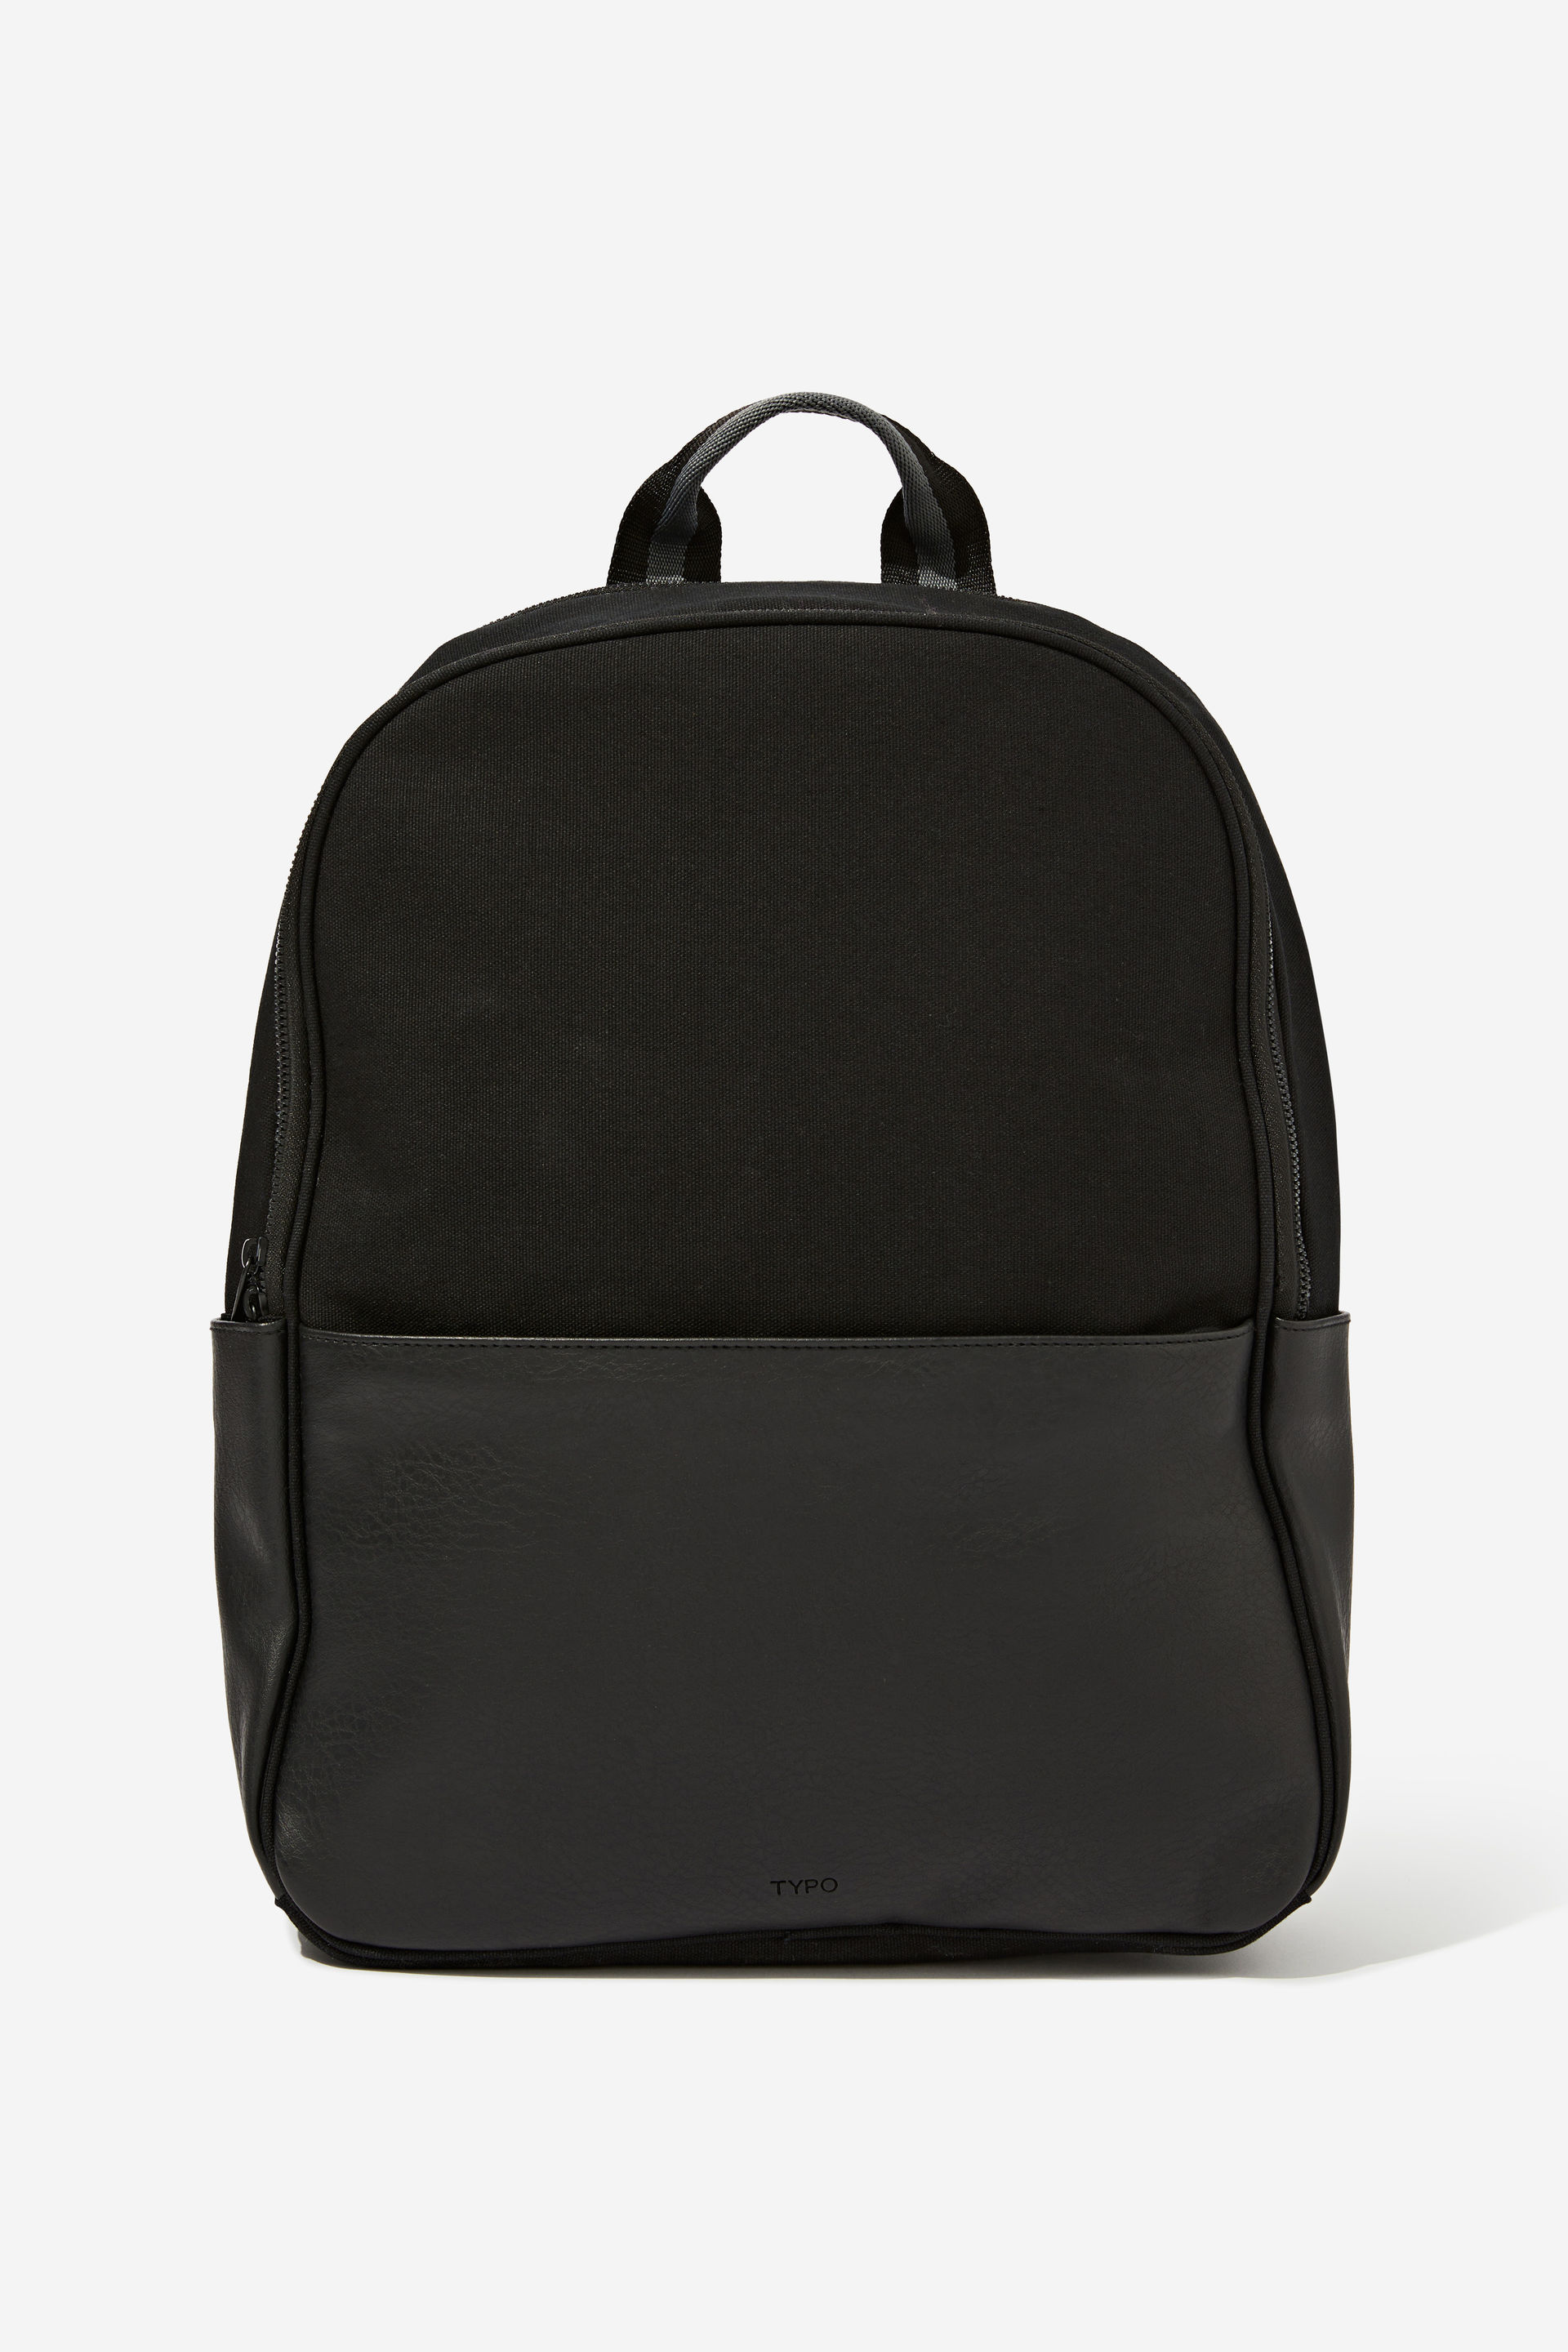 Typo - Essential Commuter Backpack - Black